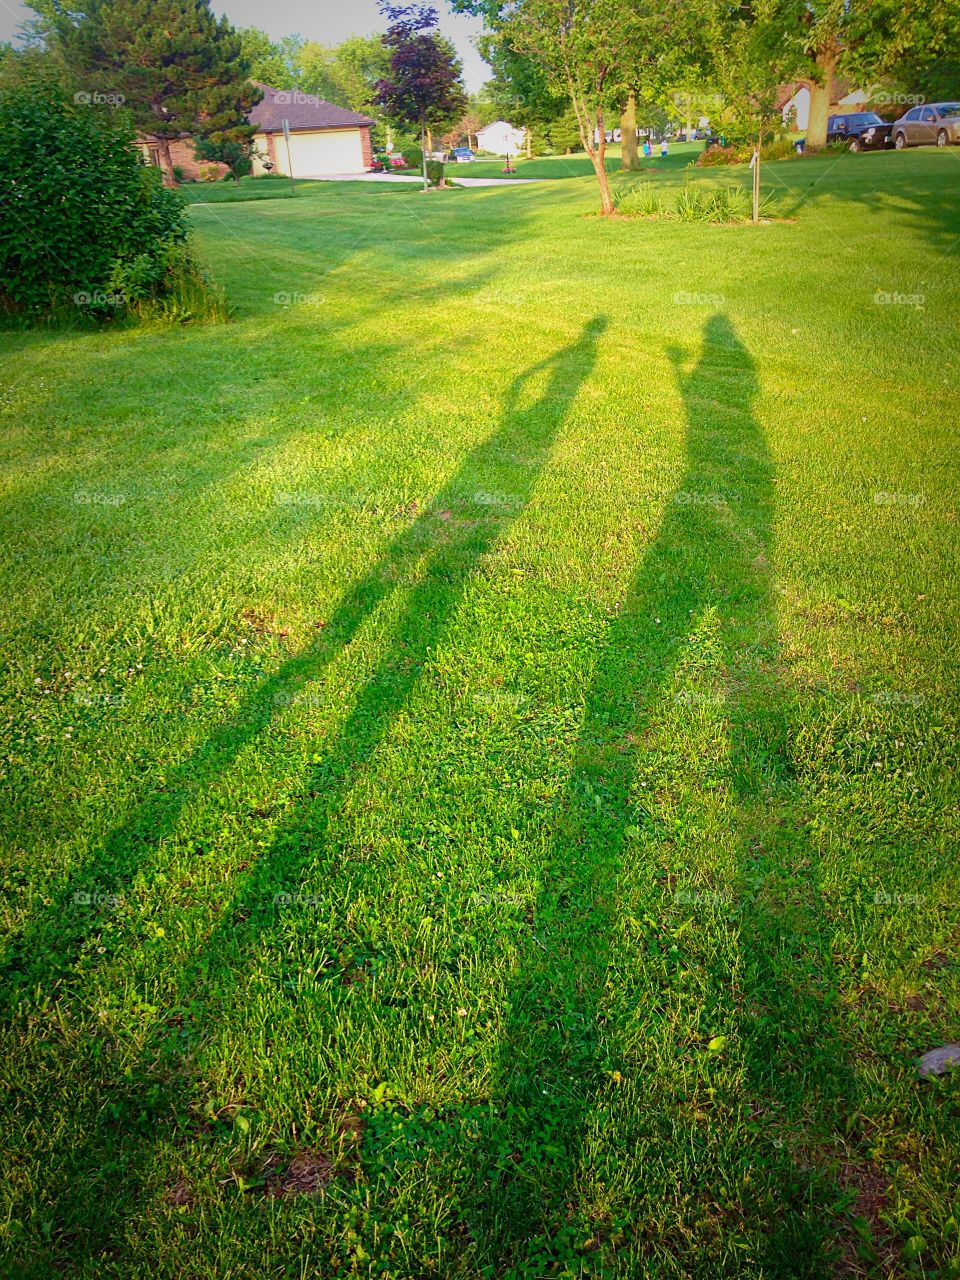 Sunset shadows . Mom and daughter shadows at sunset